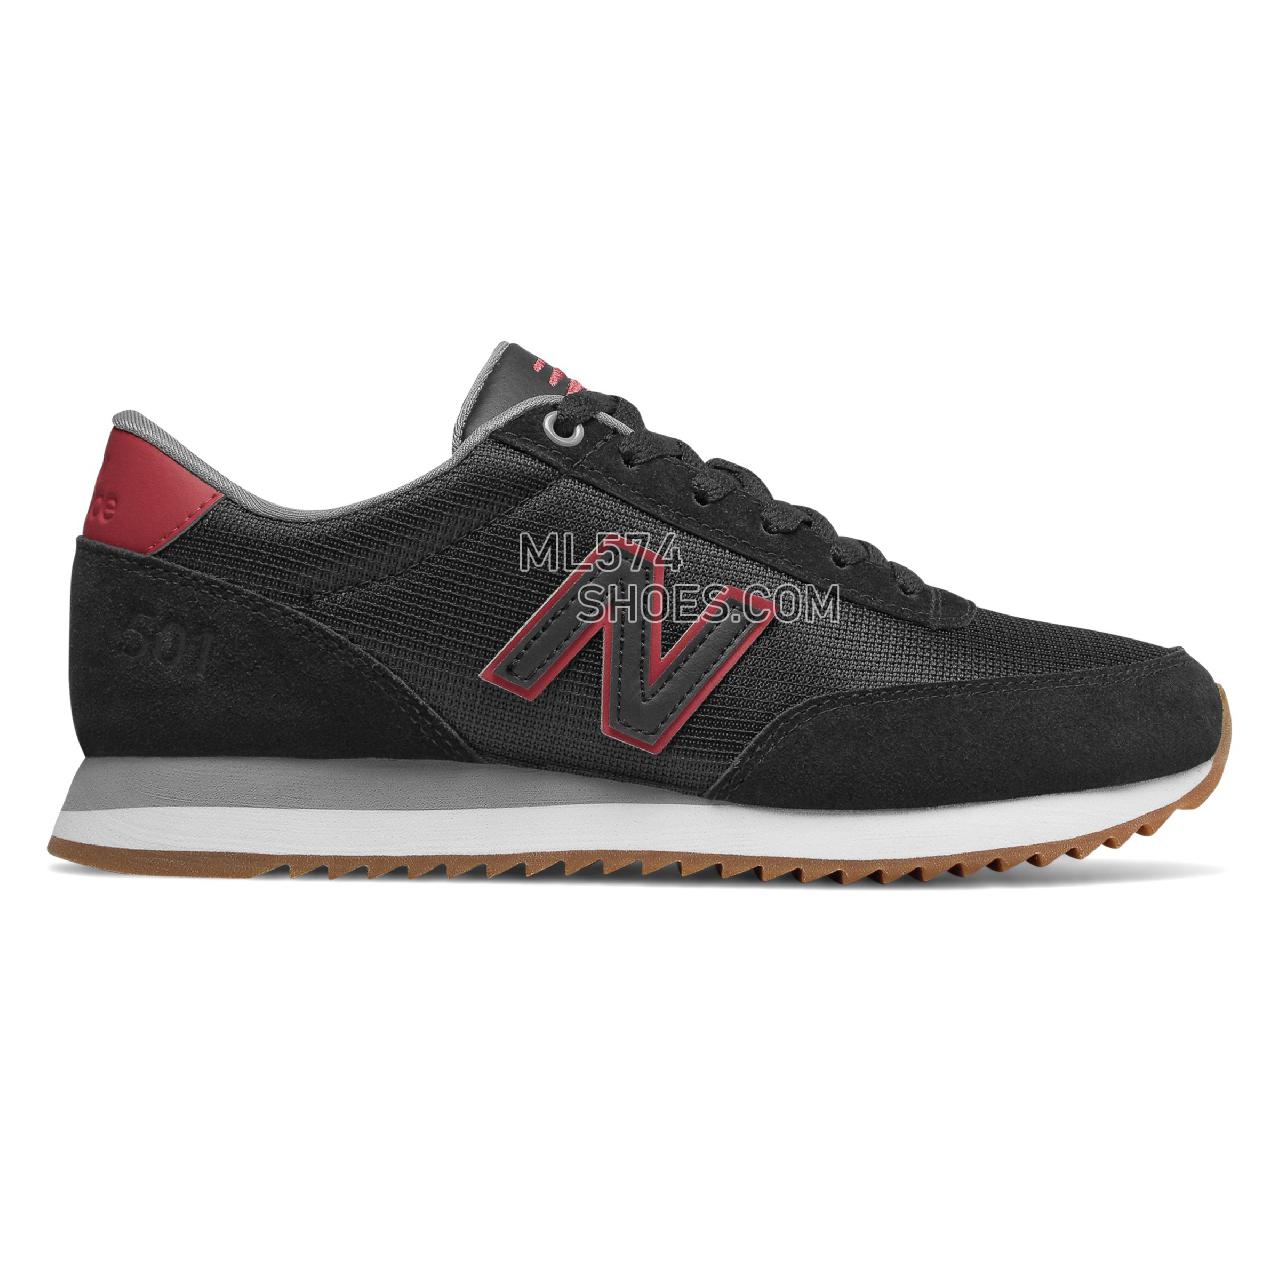 New Balance 501 - Women's 501 - Classic Black with Earth Red - WZ501MSA